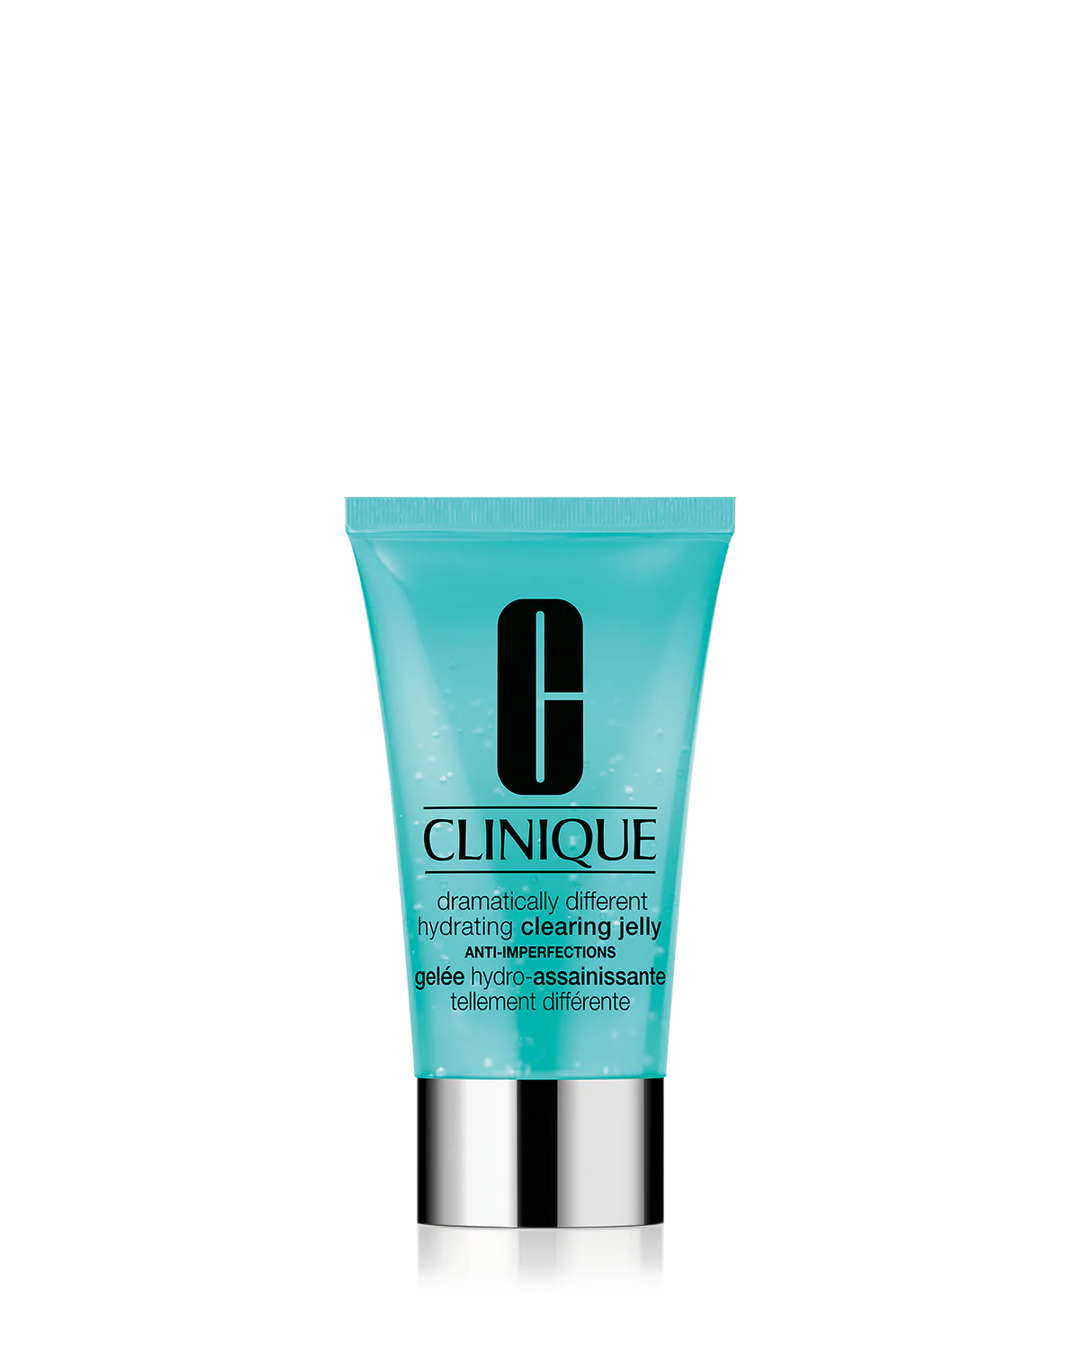 Shop The Latest Collection Of Clinique Dramatically Different Hydrating Clearing Jelly In Lebanon